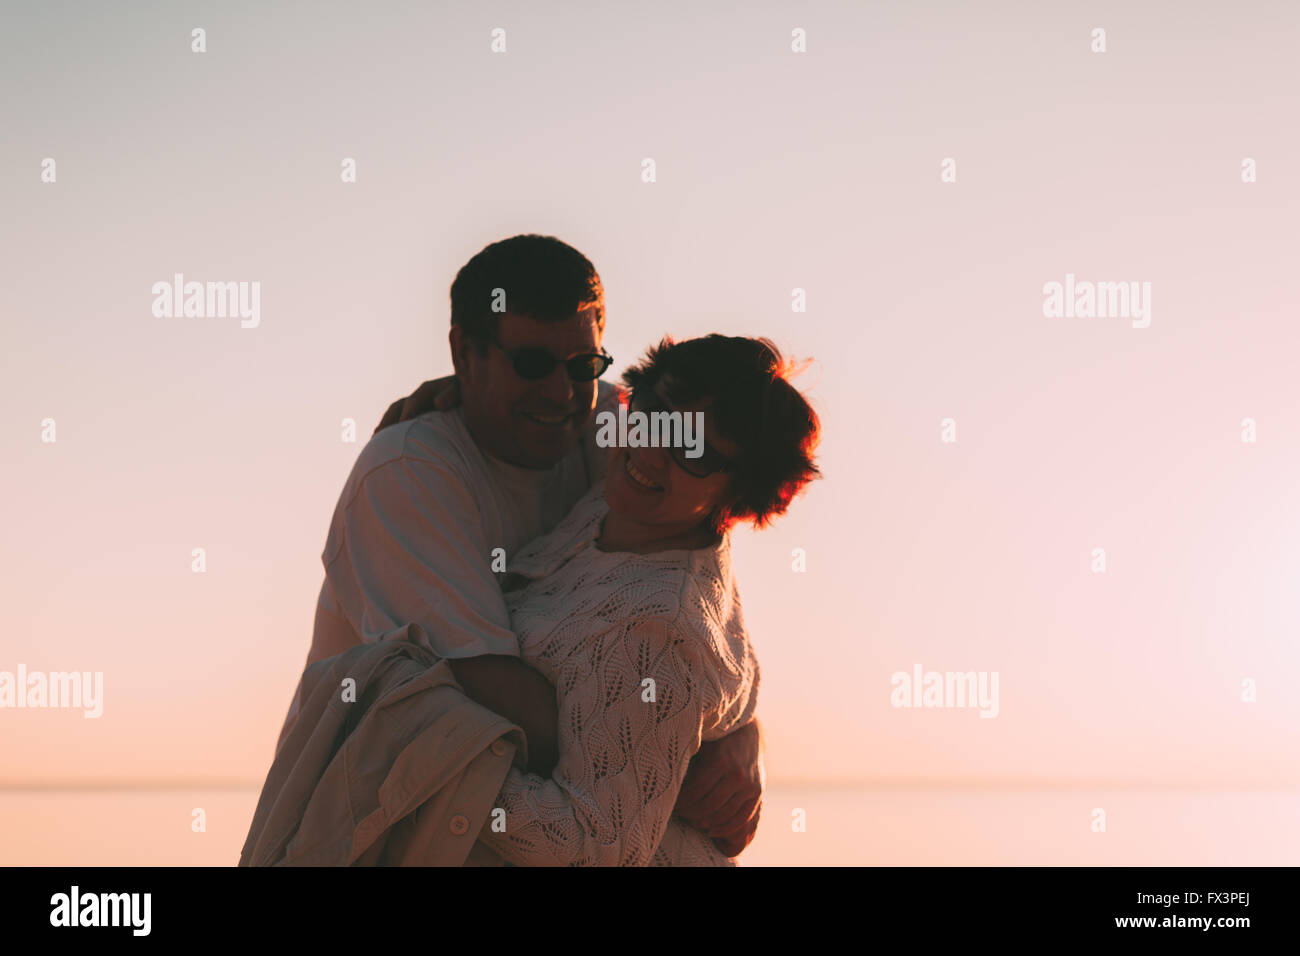 Adult couple embracing at sunset and sea. Stock Photo